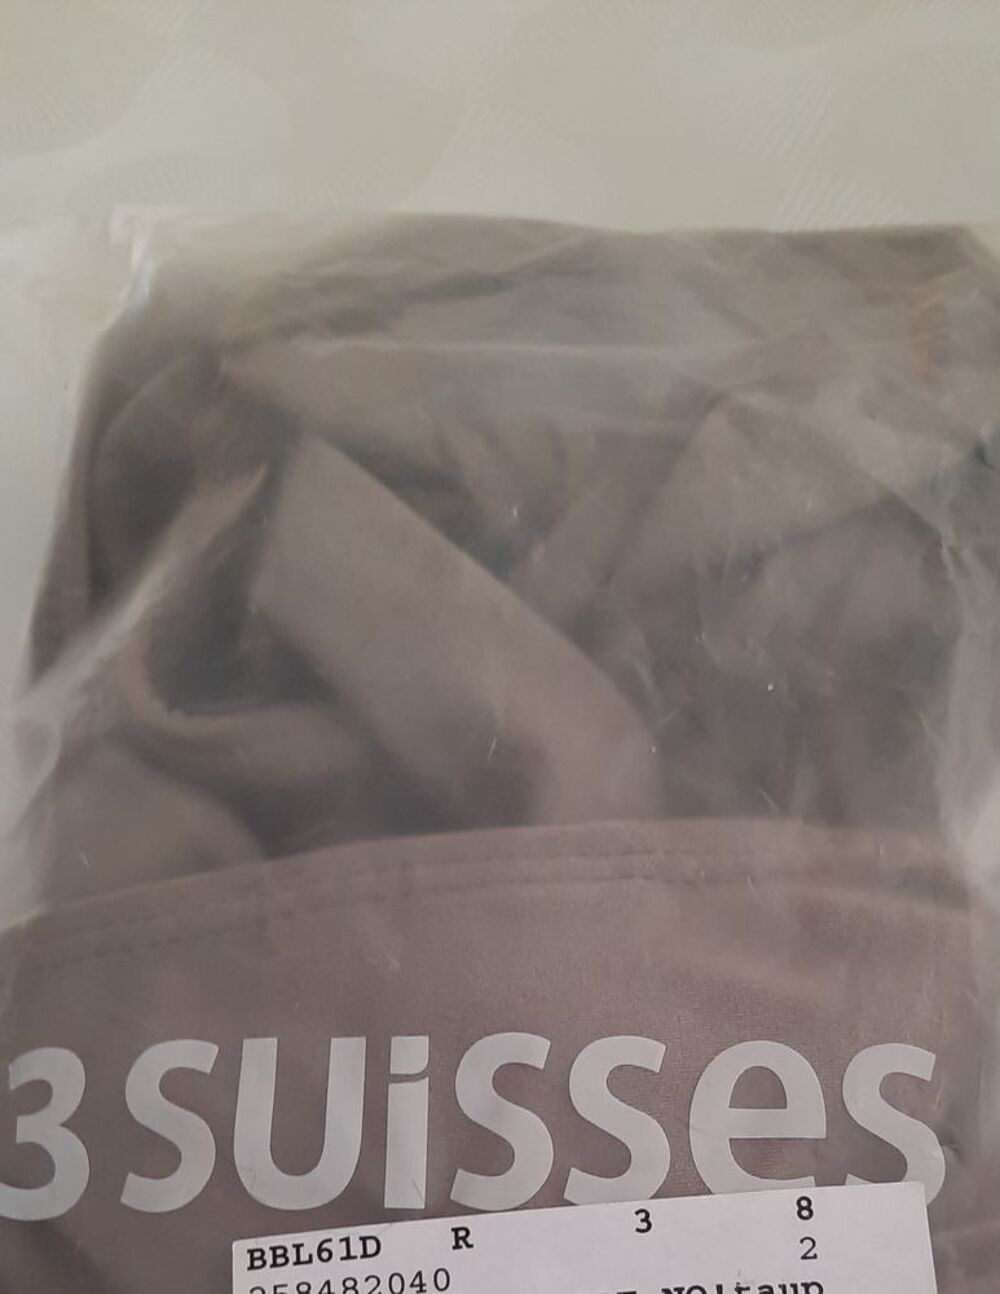 Maillot de bain taupe &agrave; noeuds 3 Suisses neuf T 40 - 90 B Vtements